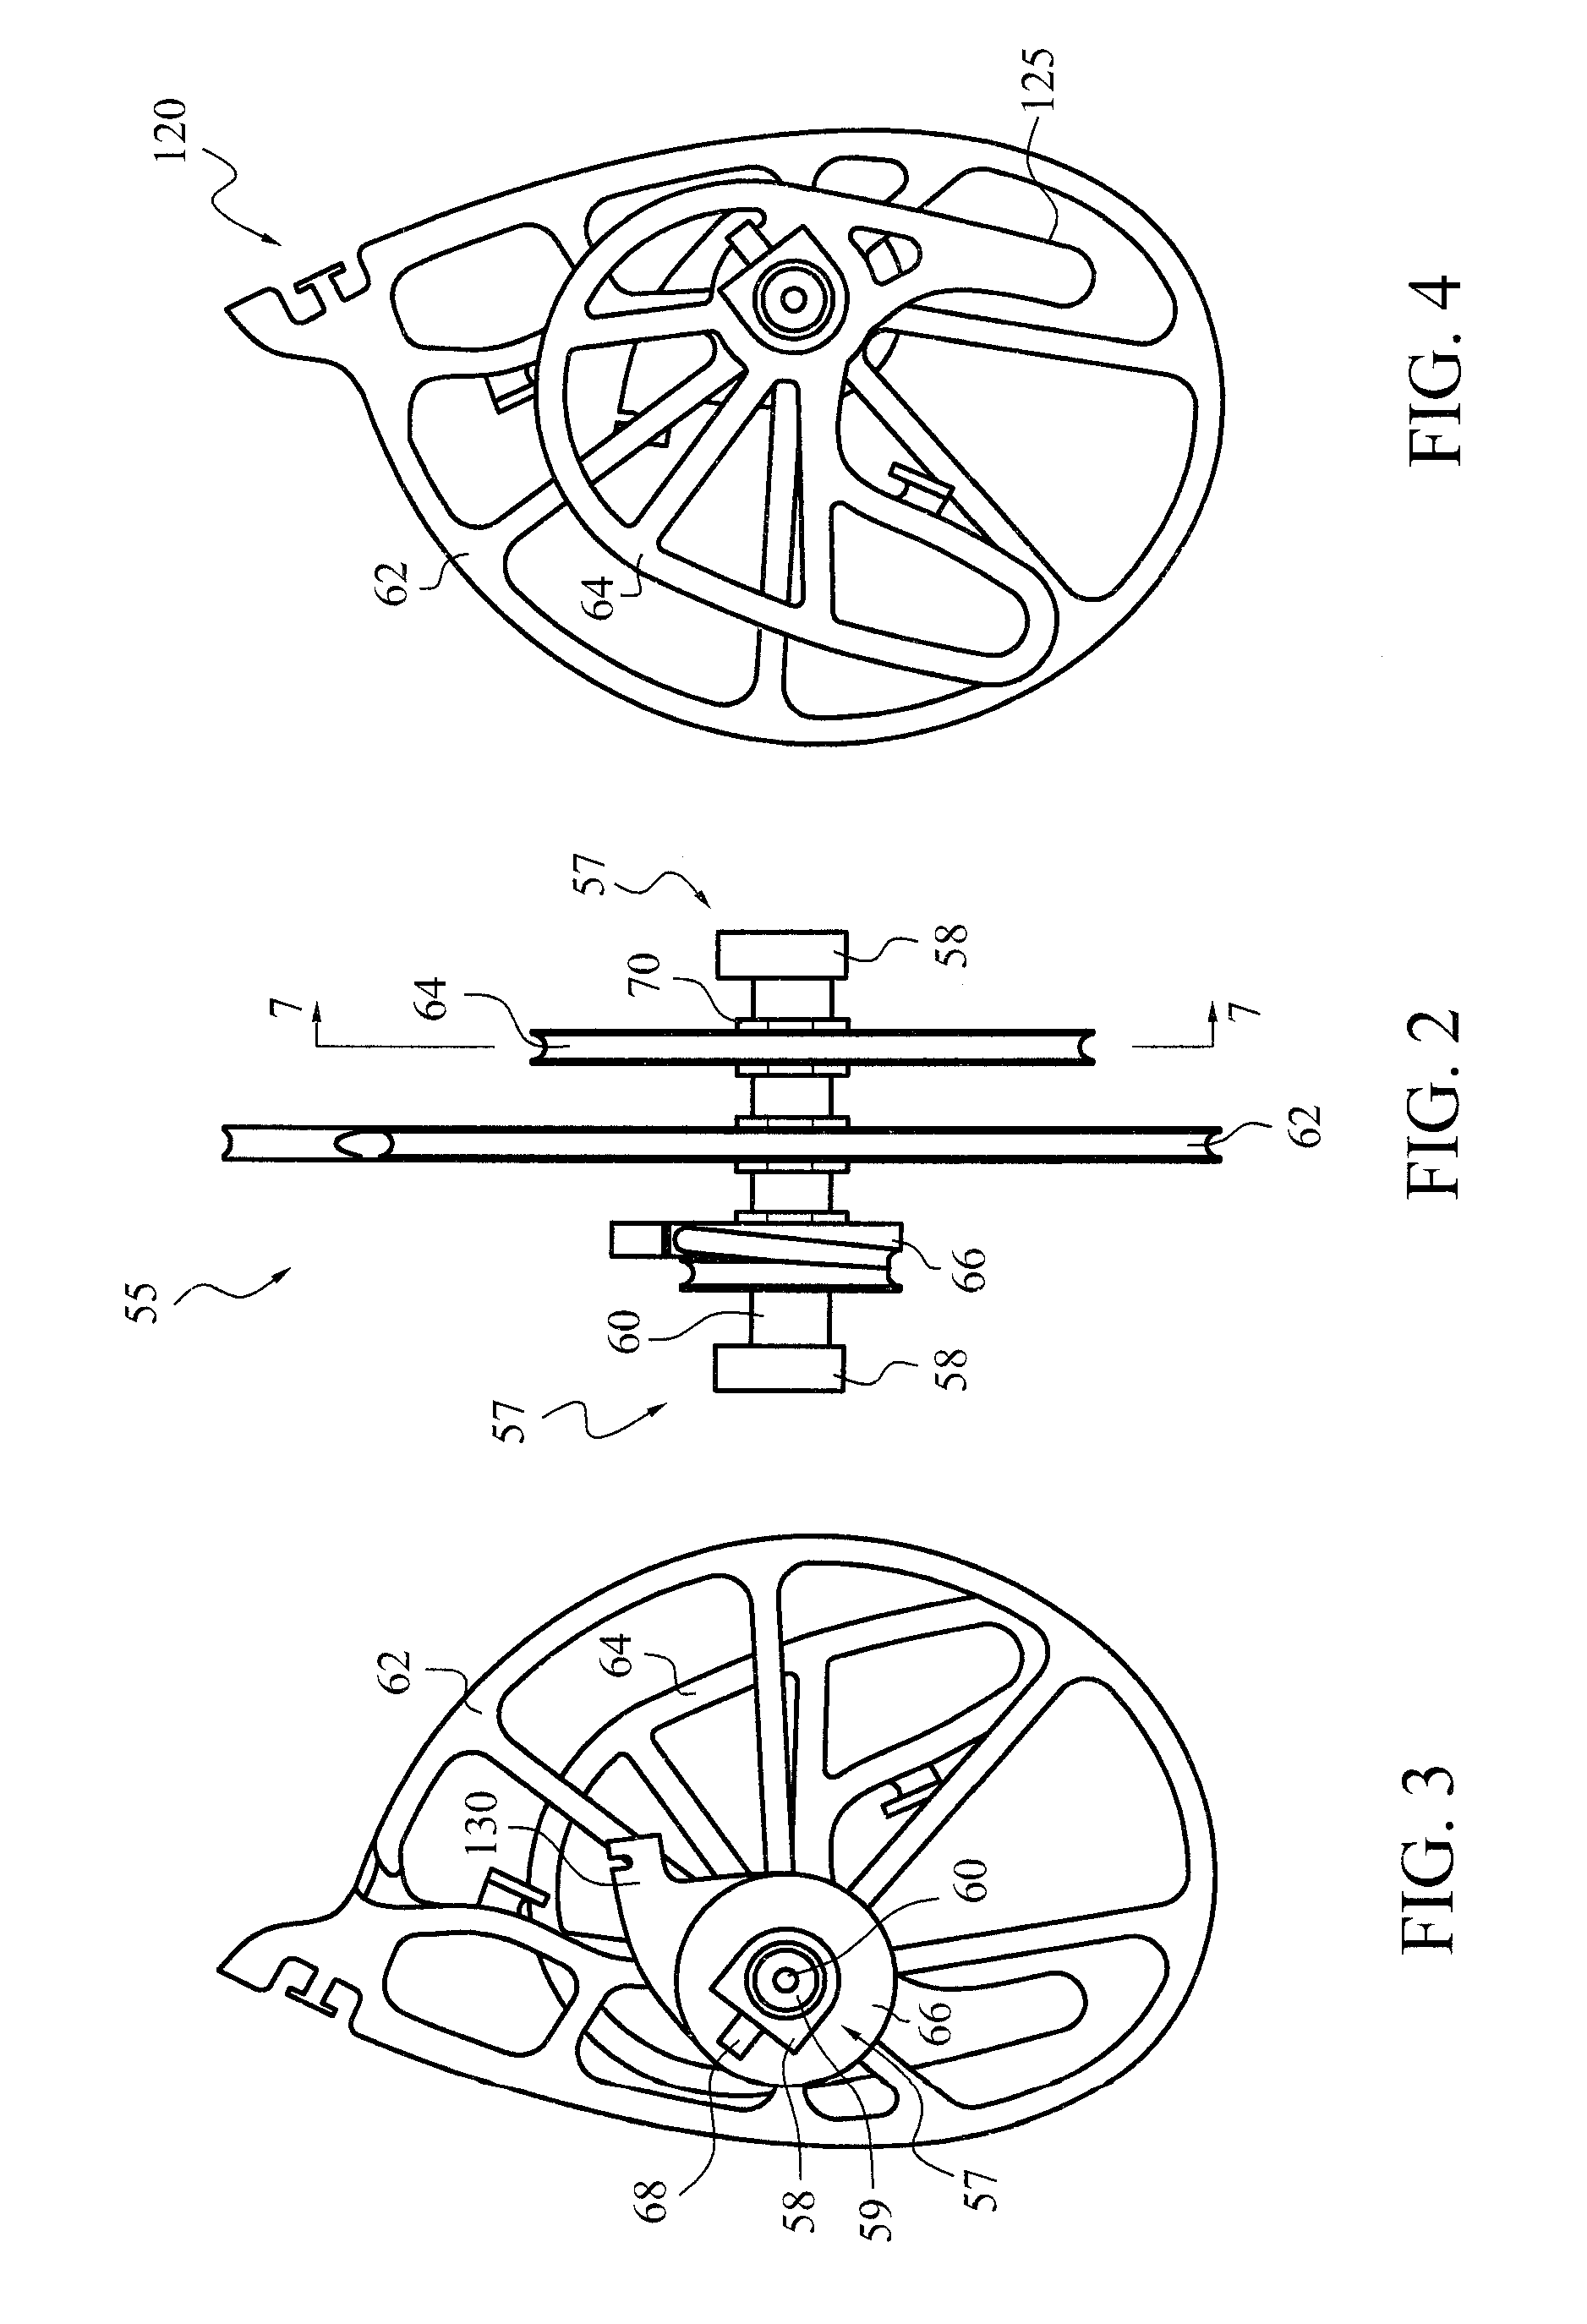 Pillow block bearing assembly for compound bows